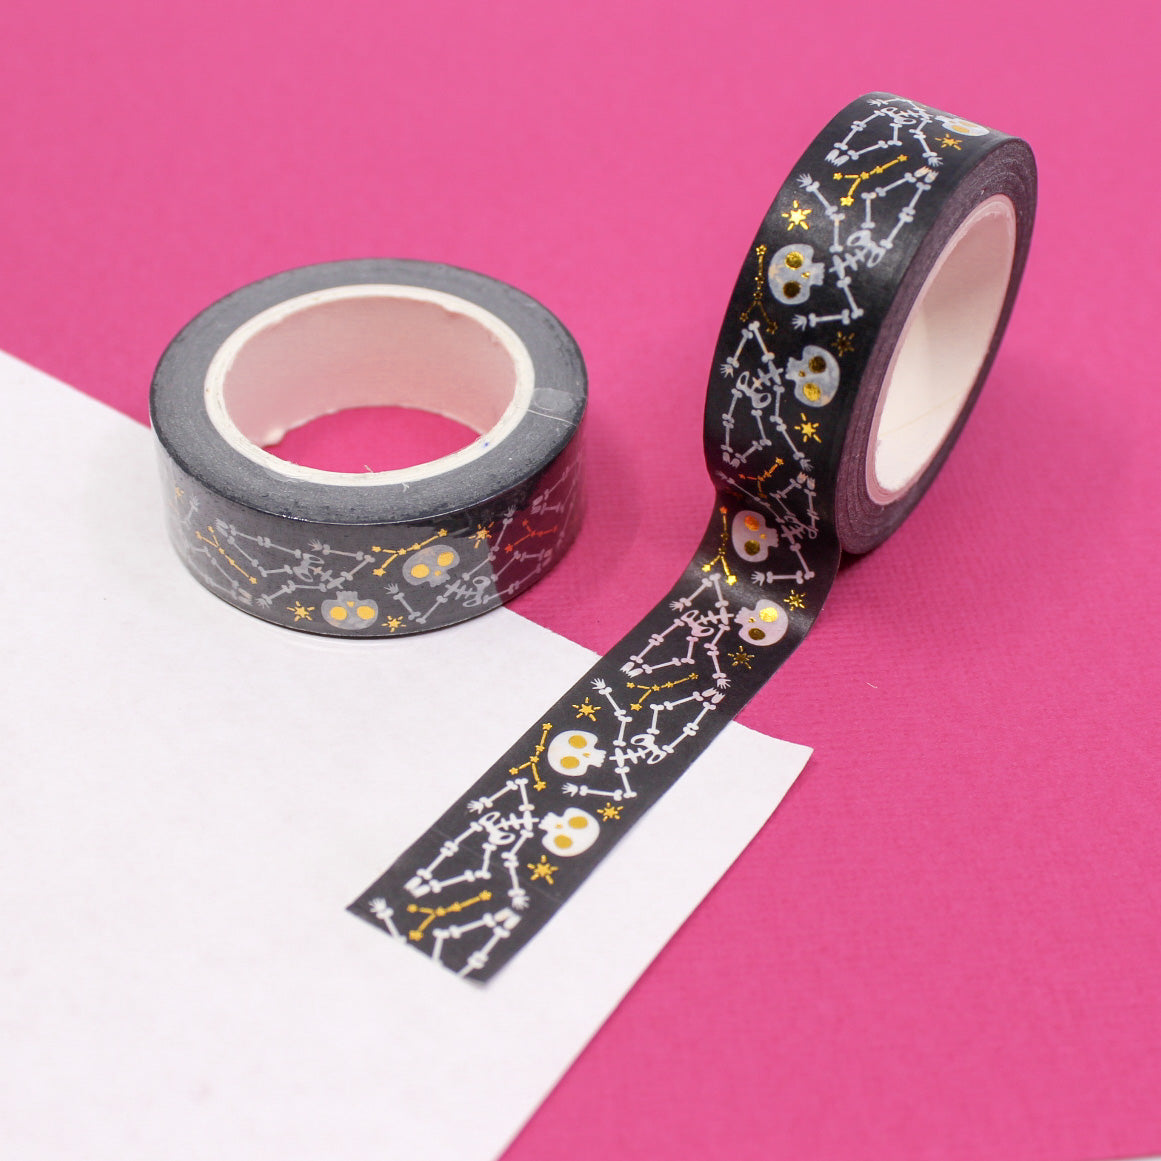 Embrace the macabre with our Gold Foil Skull and Bones Washi Tape, featuring a stylish pattern of skulls and bones in shimmering gold foil. Ideal for adding a touch of elegance to your spooky projects. This tape is sold at BBB Supplies craft Shop.